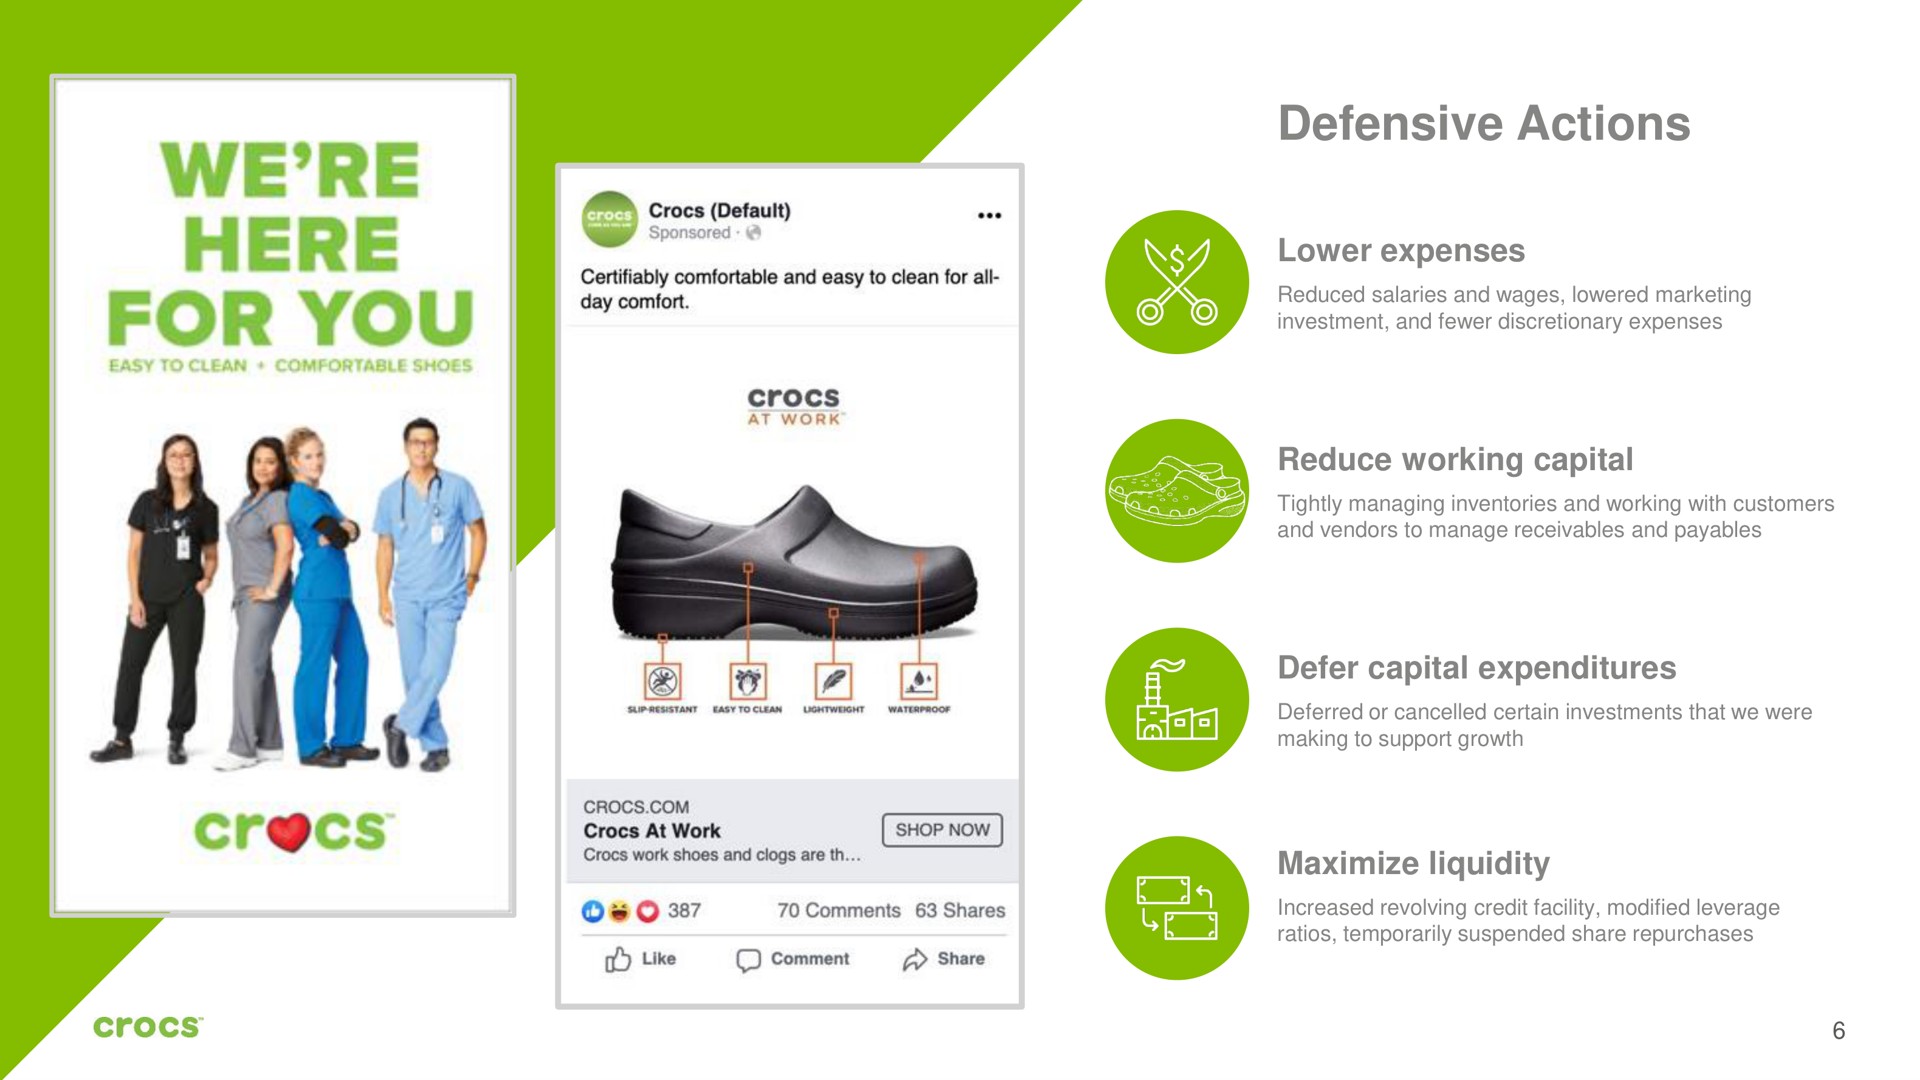 defensive actions we here for you at work defer capital expenditures | Crocs